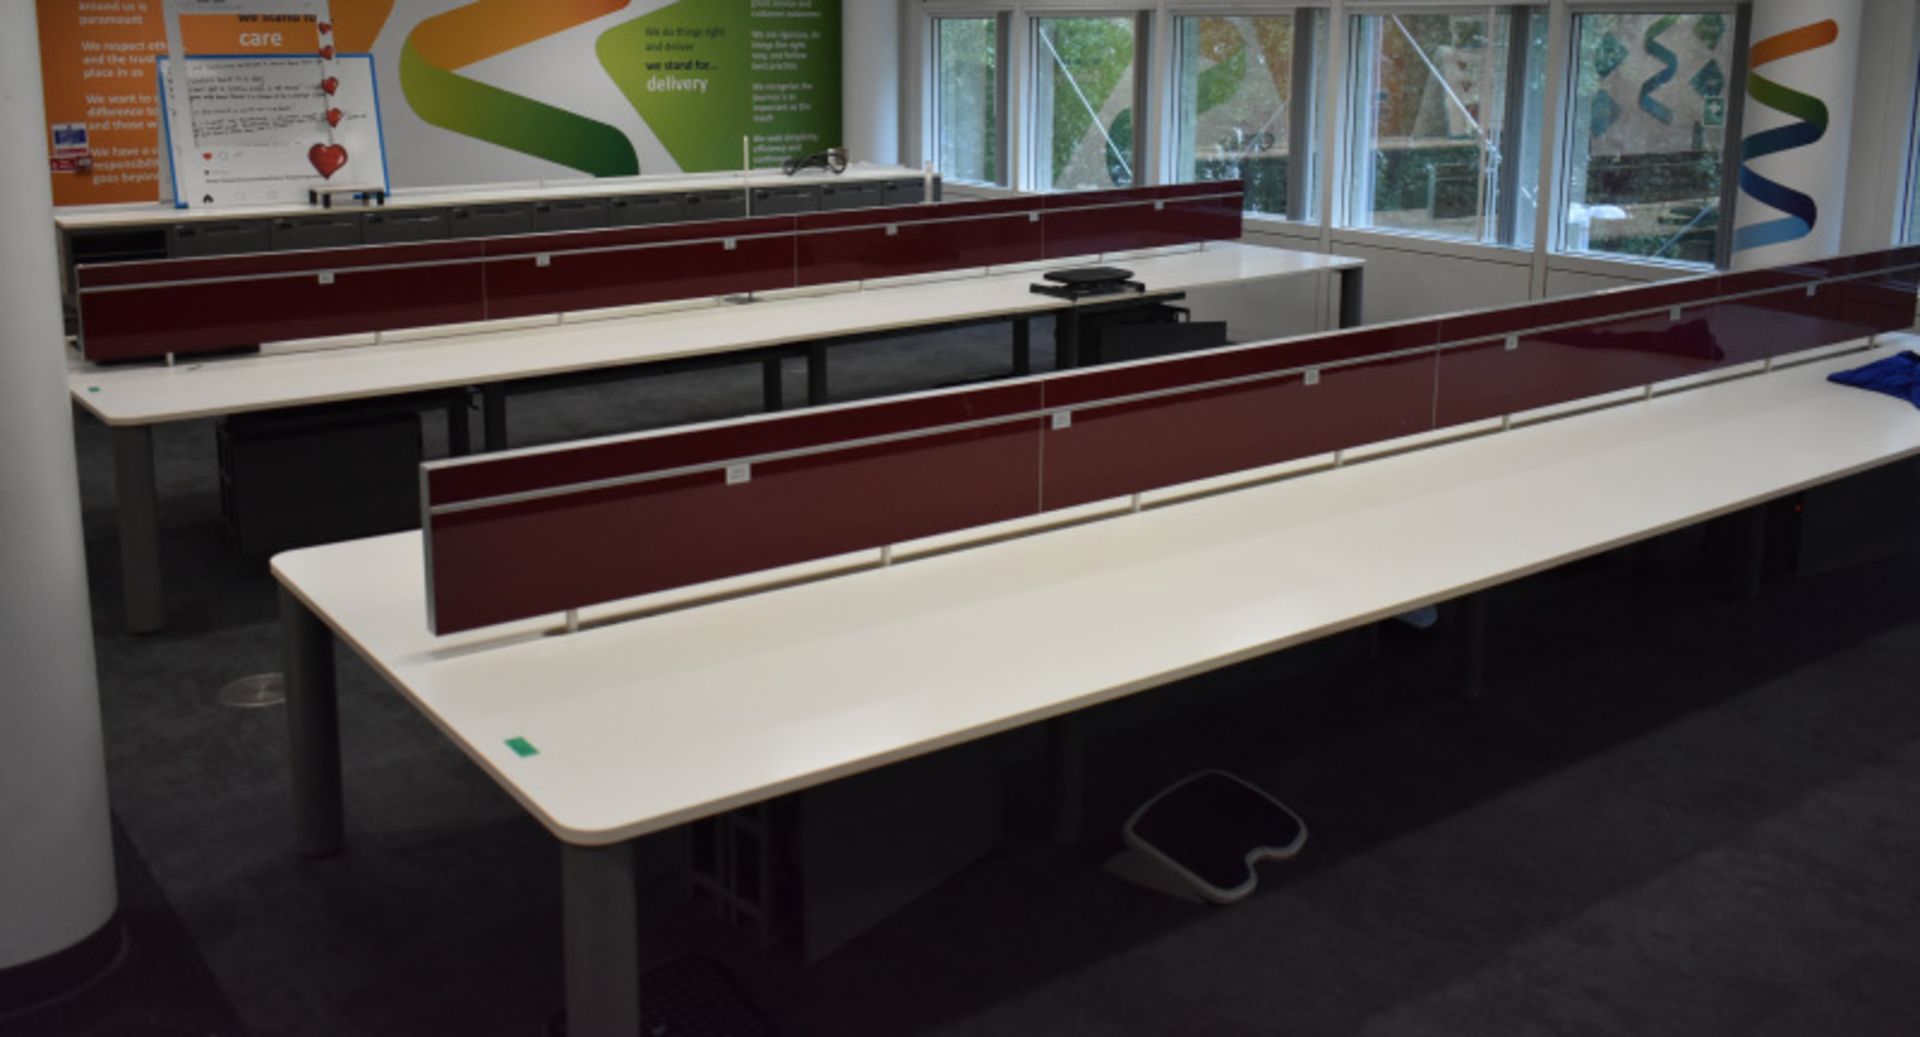 Bank of desks, seating 12, L 6500mm x W 1800mm x H 1180mm, buyer to dismantle and remove - Image 4 of 4